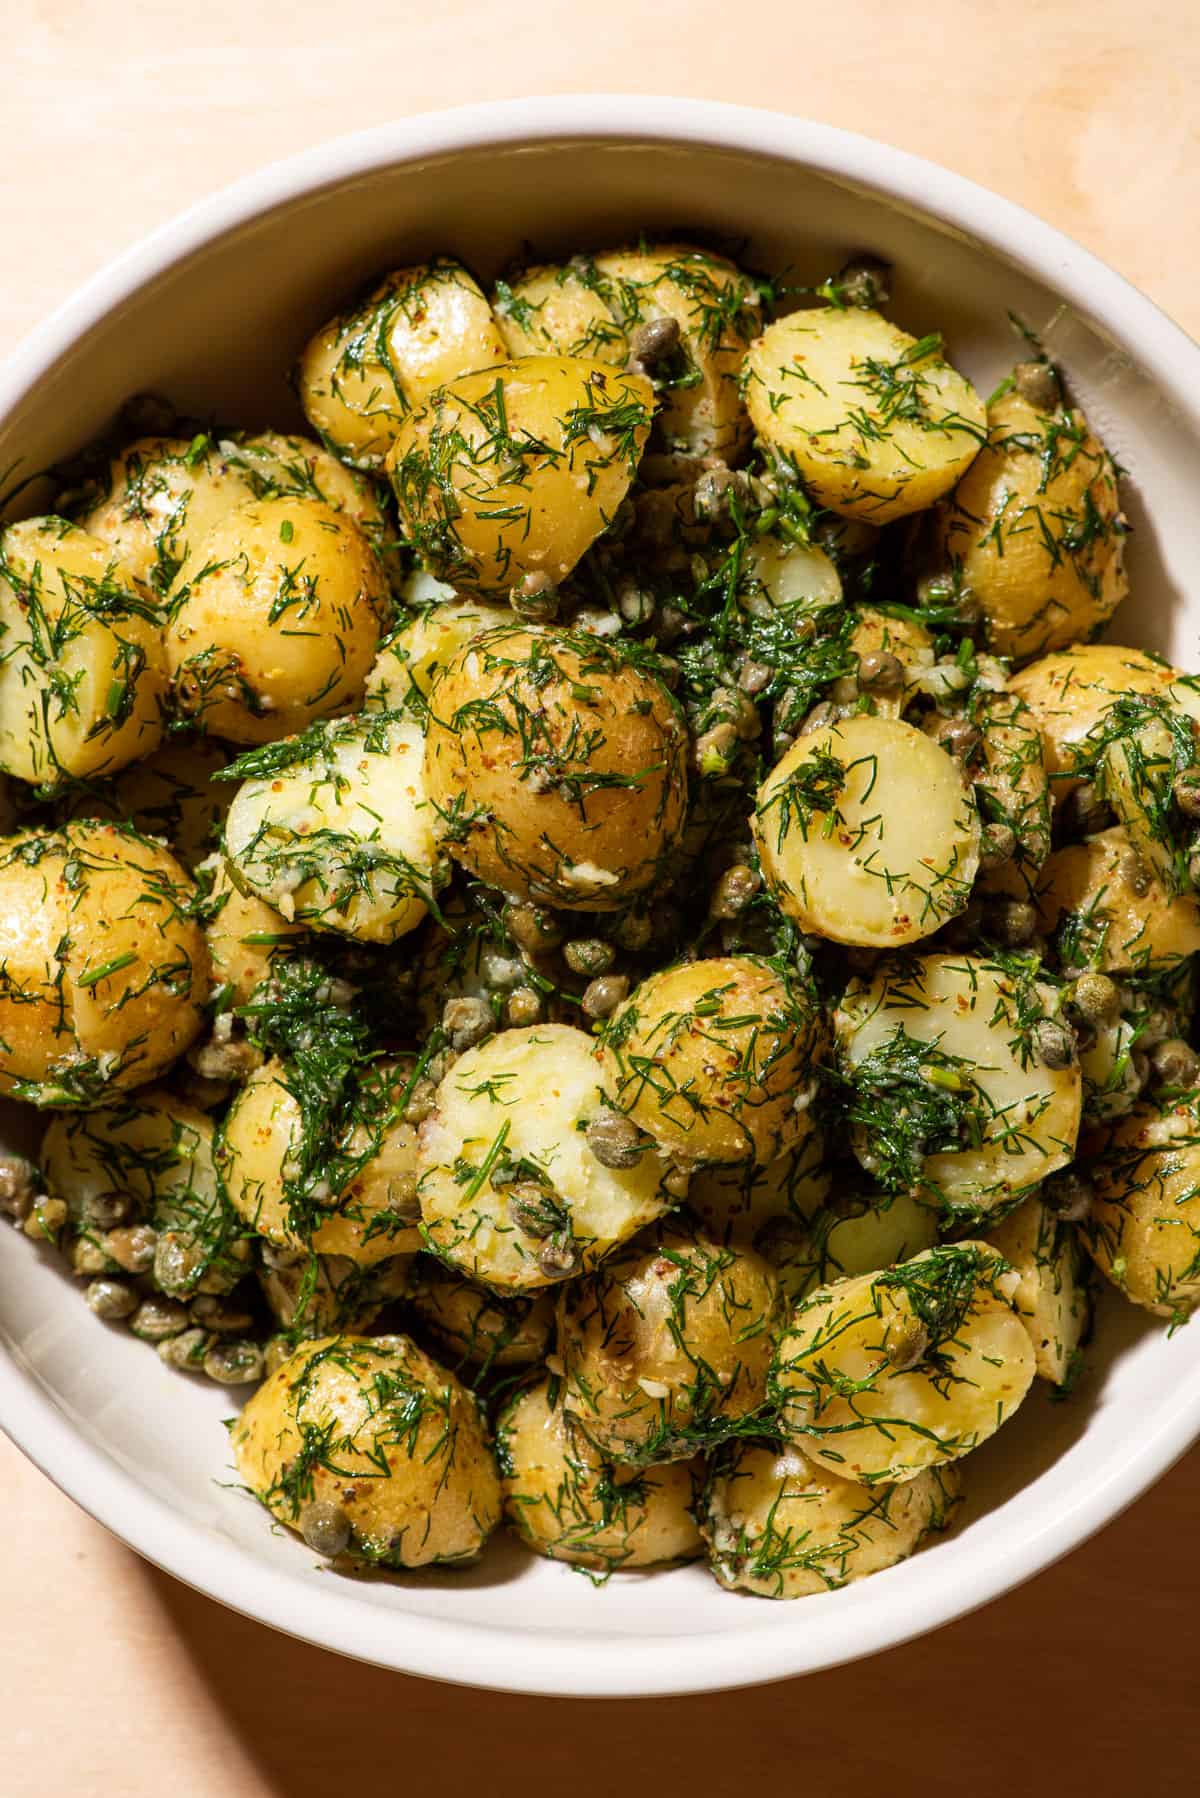 Bowl of French-style herbed potato salad with dill and capers (no mayo).